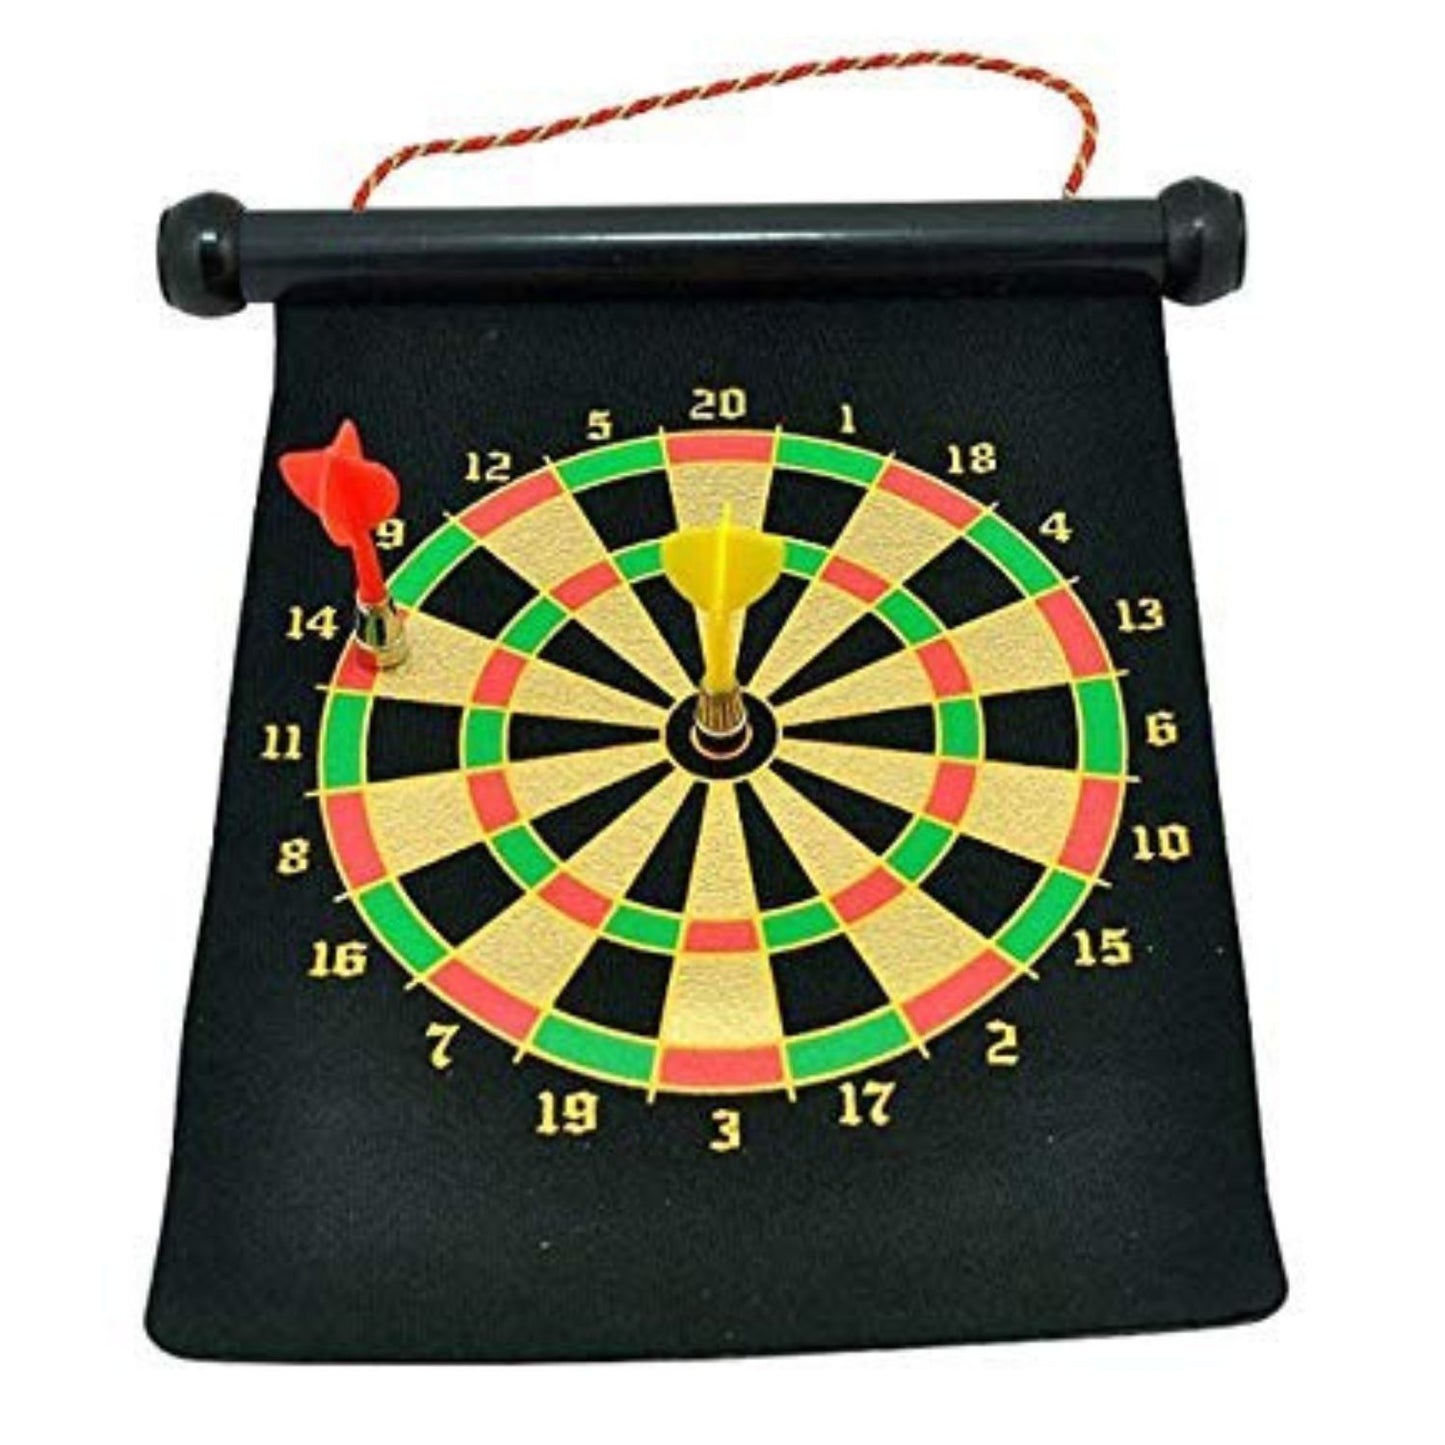 MM TOYS Foldable 12-Inch Magnetic Dart Board - Double-Sided with 2 Safe, Edgeless Darts Included